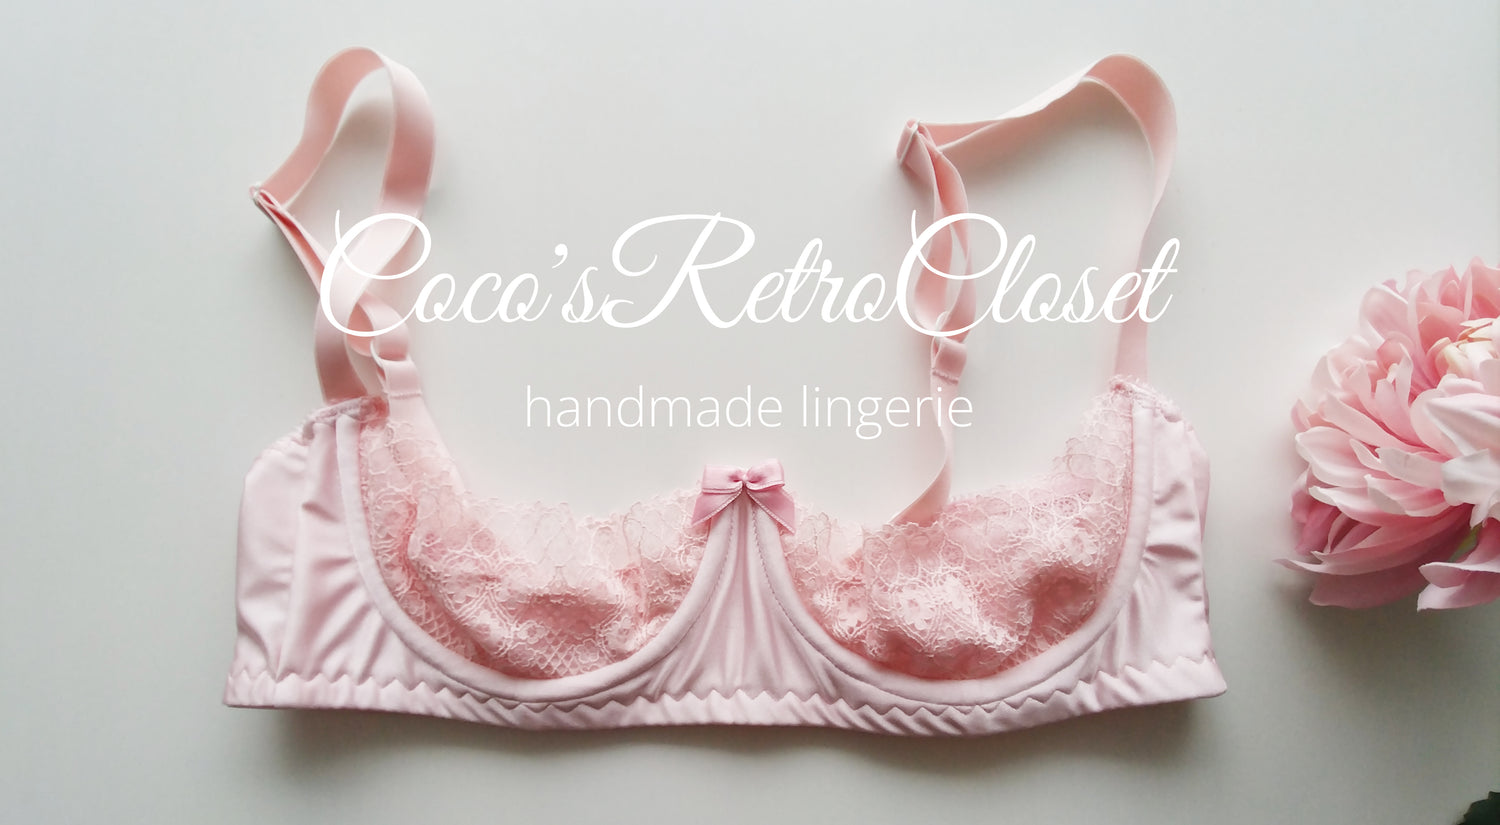 Pink Vintage Corsets & Girdles for Women for sale